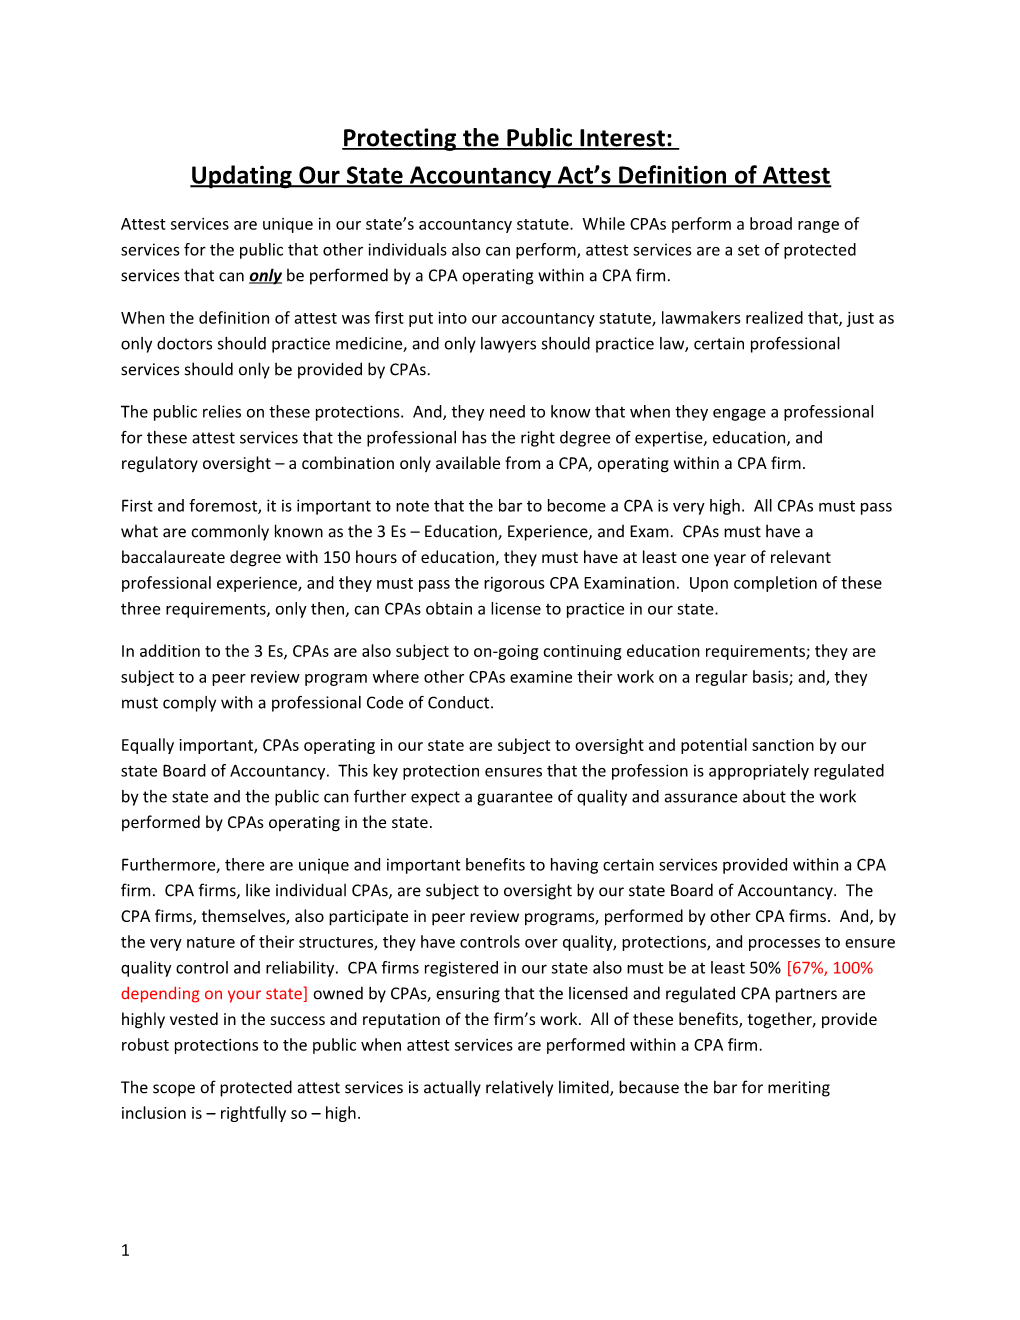 Protecting the Public Interest: Updating Our State Accountancy Act S Definition of Attest